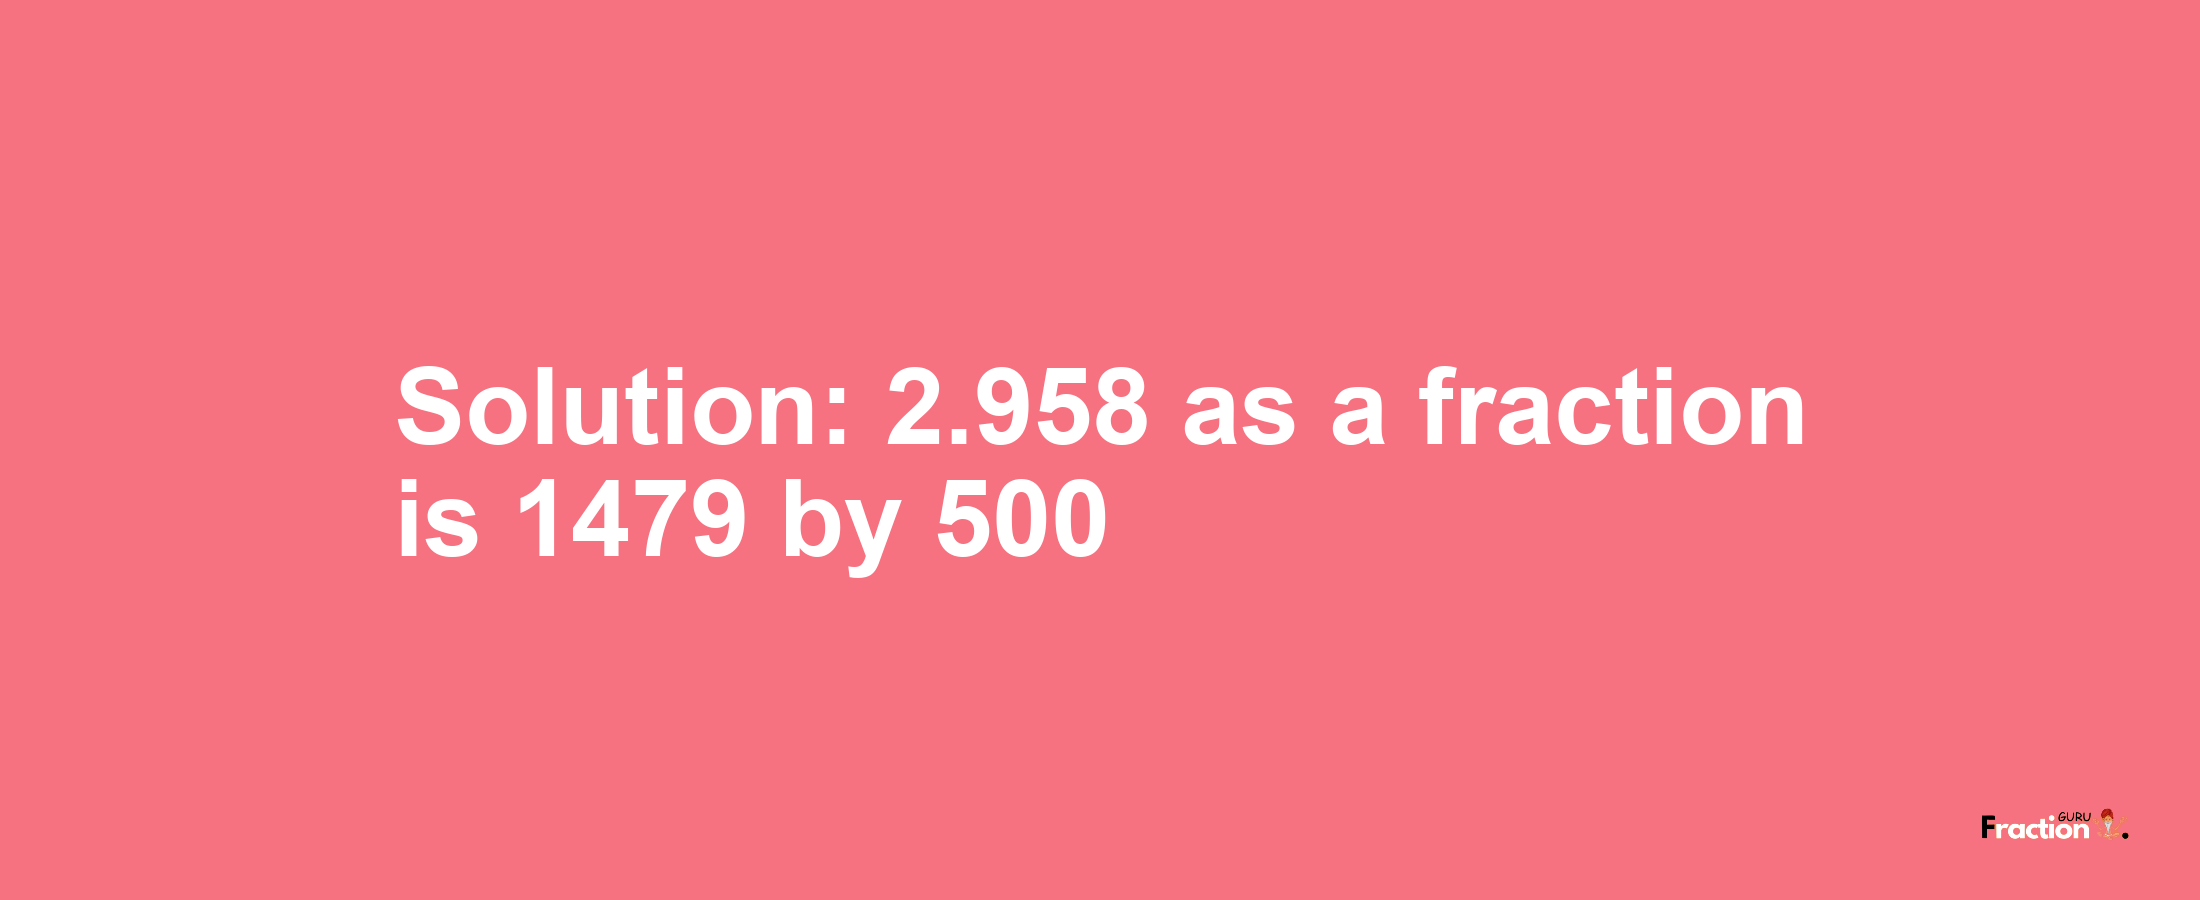 Solution:2.958 as a fraction is 1479/500